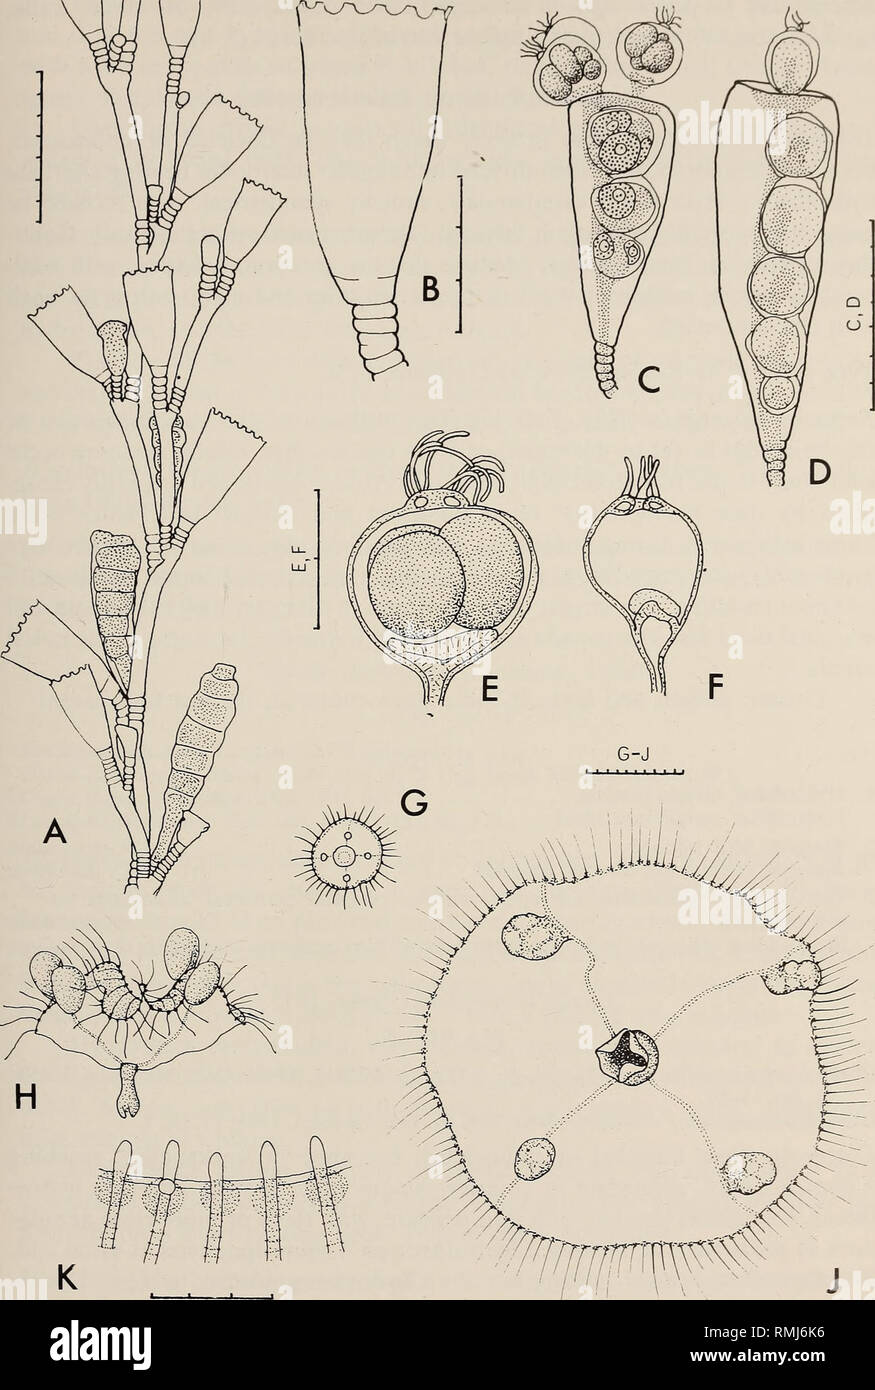 . Annals of the South African Museum = Annale van die Suid-Afrikaanse Museum. Natural history. MONOGRAPH ON THE HYDROIDA OF SOUTHERN AFRICA 225. Fig. 74. Gonothyraea loveni. A, stem with female gonophores; B, hydrotheca; C and D, female and male gonophores releasing meconidia; E, female meconidium with planulae; F, empty male meconidium. Obelia sp., medusae. G, newly liberated; H, in a typical swimming position; J, the largest specimen seen; K, edge of bell showing tentacle roots, circular canal and statocyst. Scale in mm/10.. Please note that these images are extracted from scanned page image Stock Photo